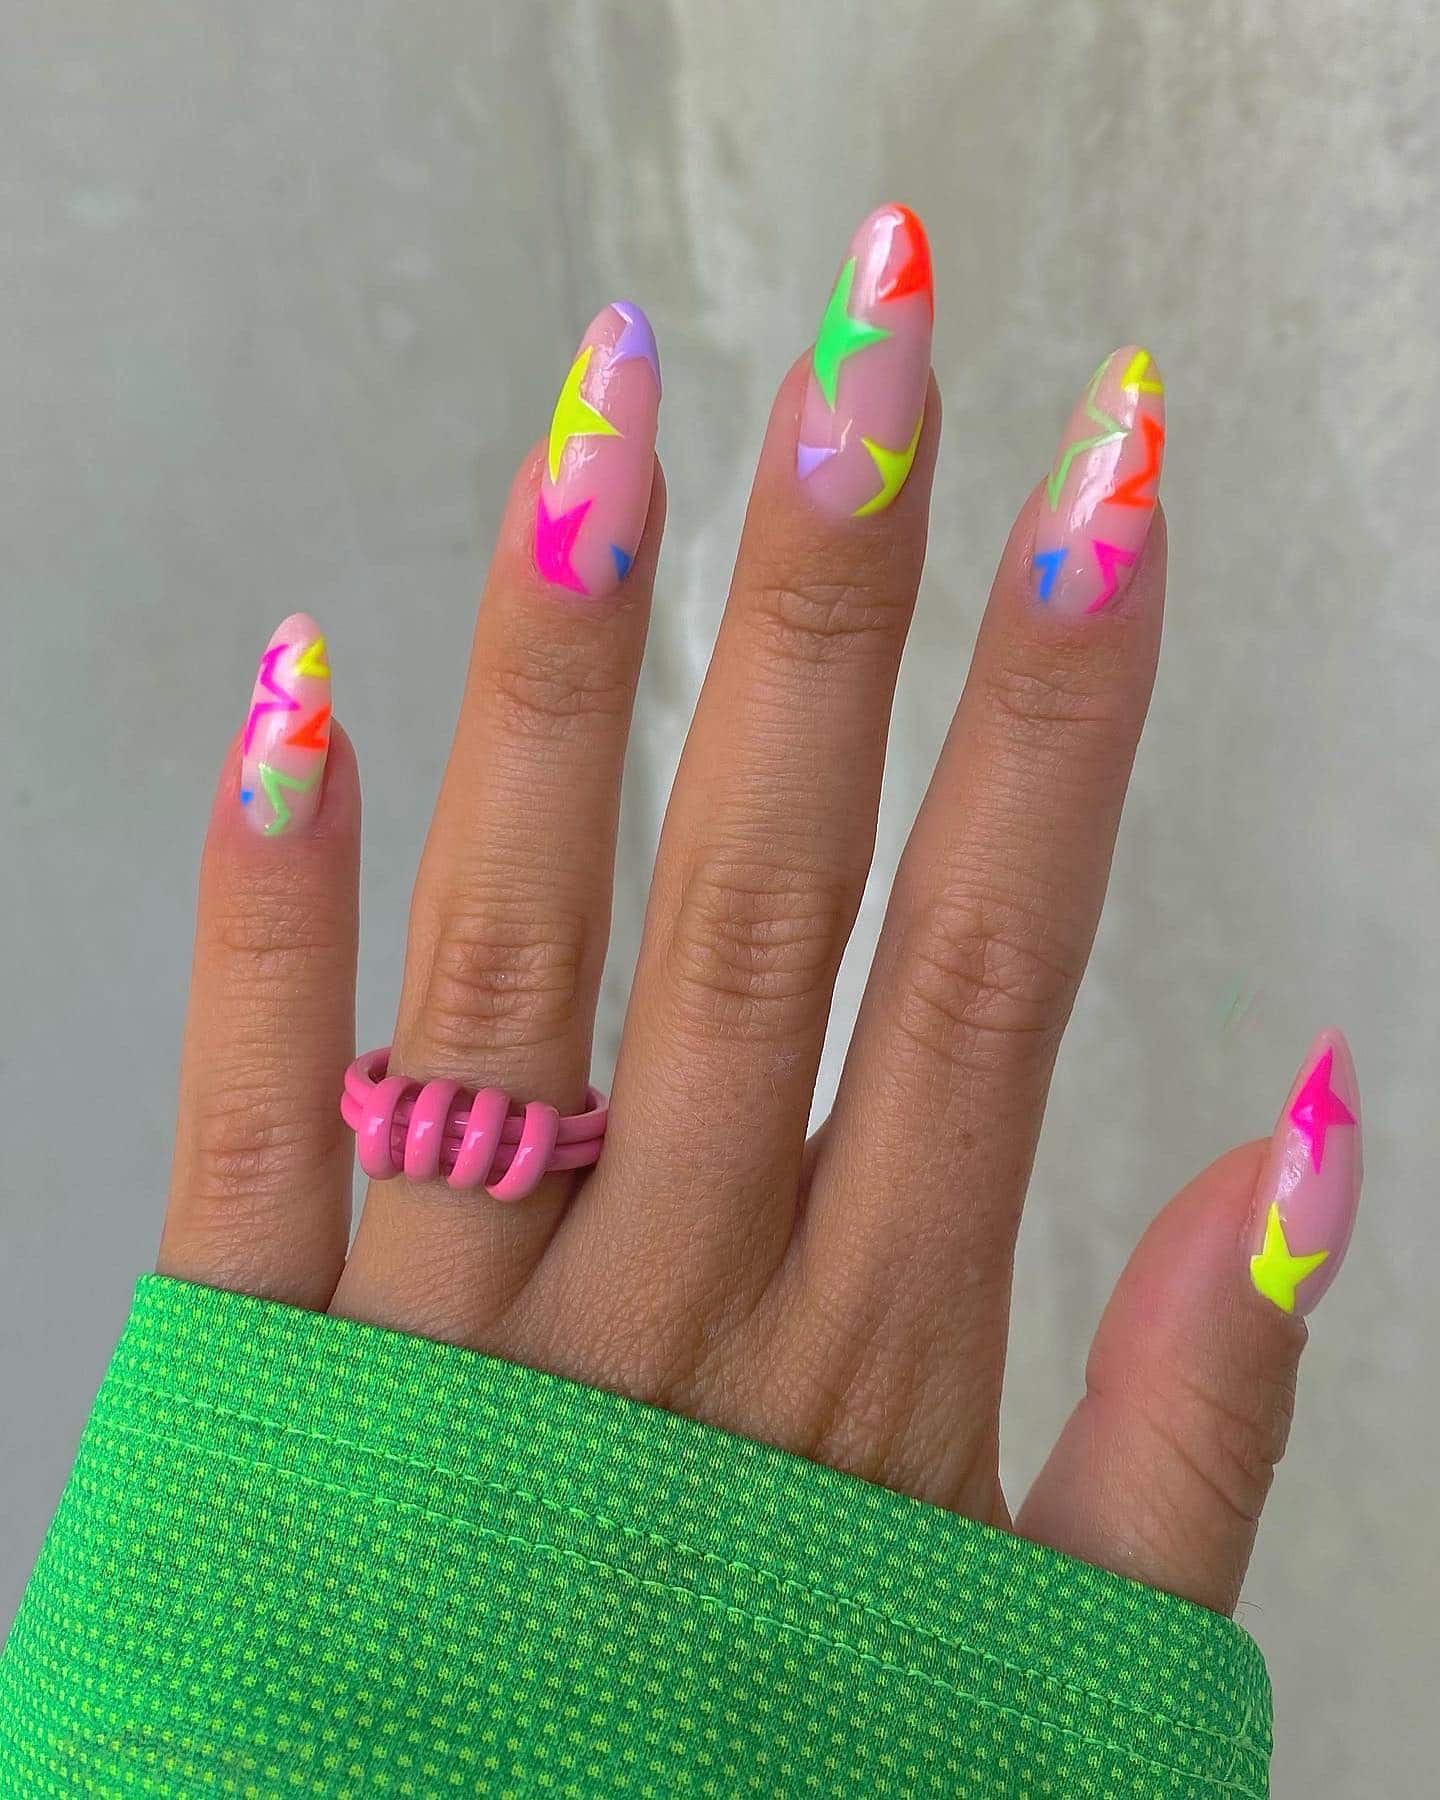 100 Cute Star Nail Art Designs To Add Some Fun To Your Nails